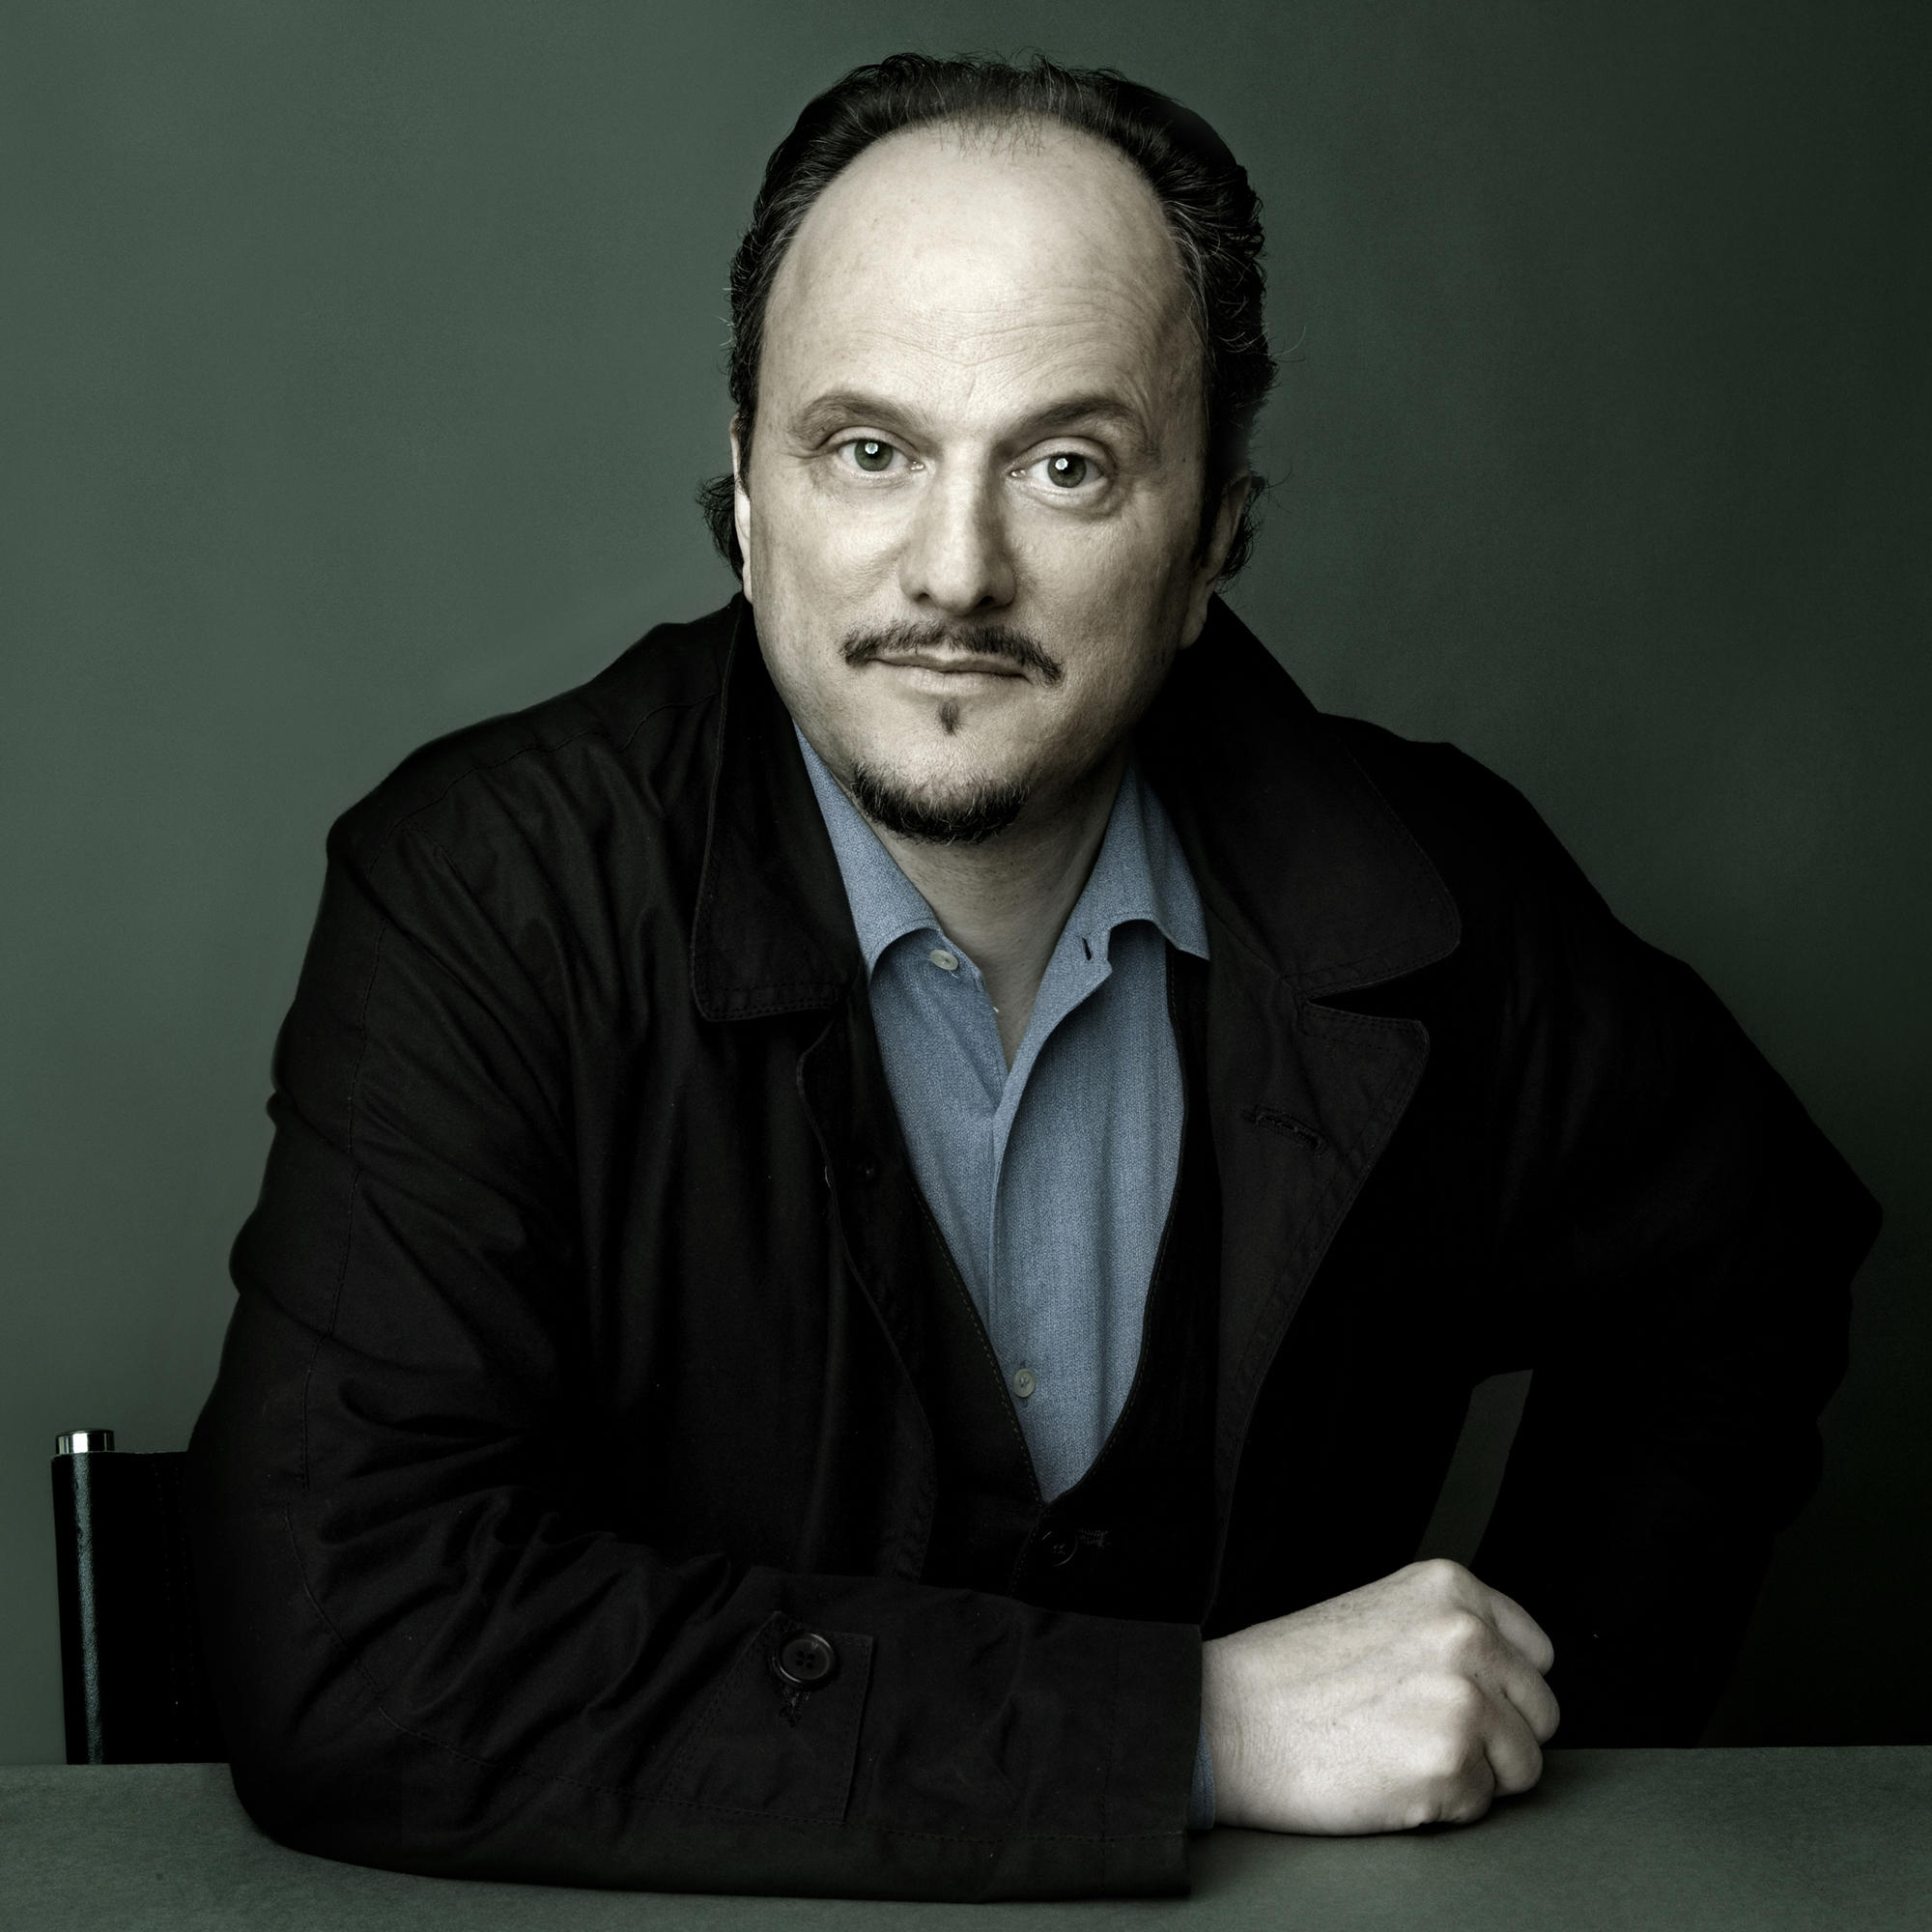 jeffrey eugenides the marriage plot review